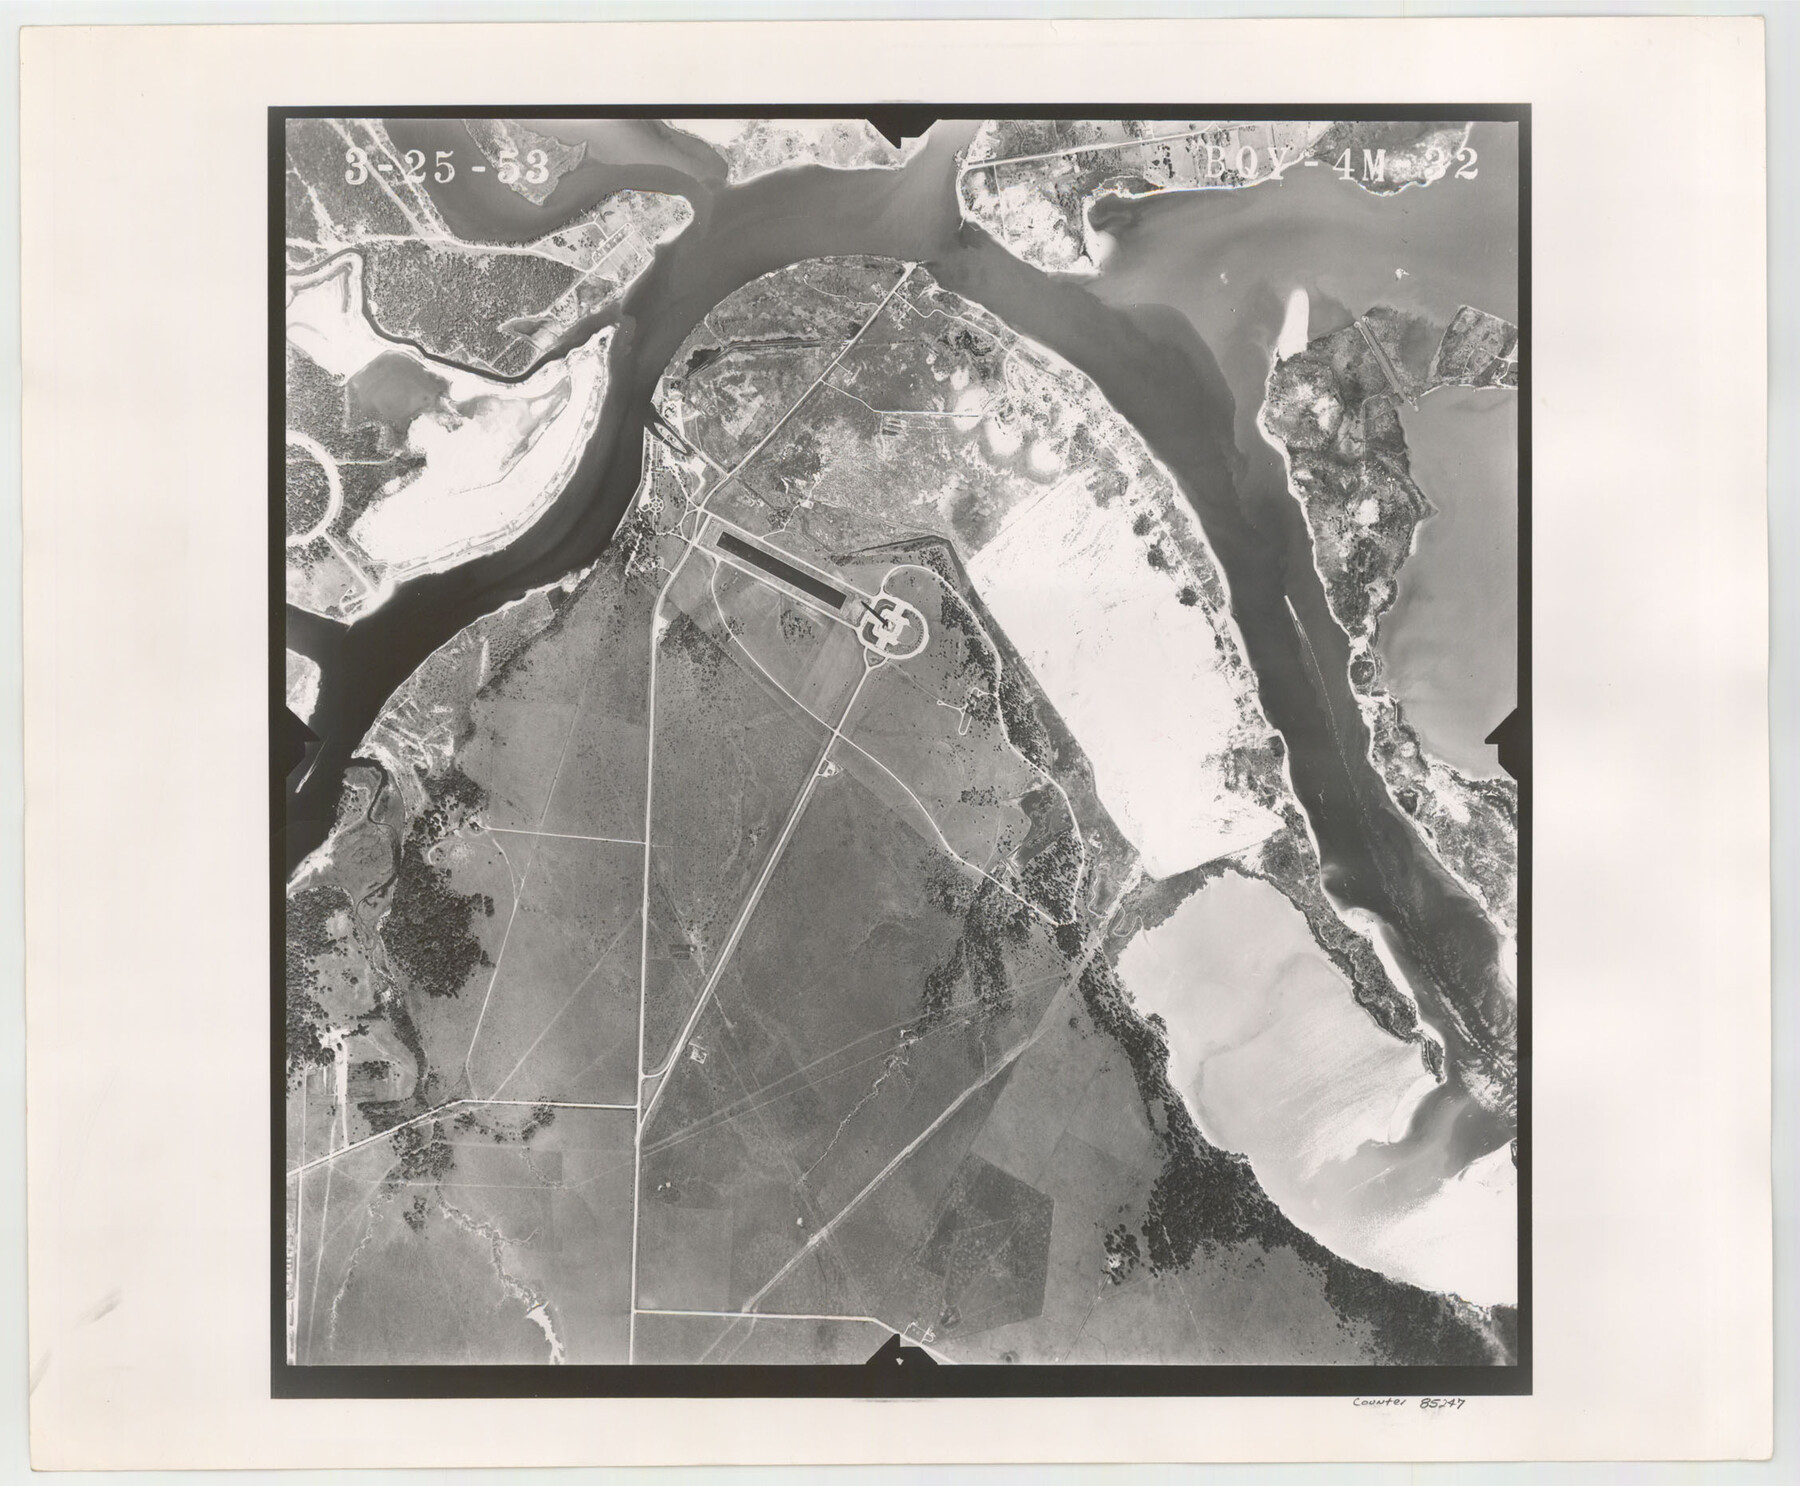 85247, Flight Mission No. BQY-4M, Frame 32, Harris County, General Map Collection